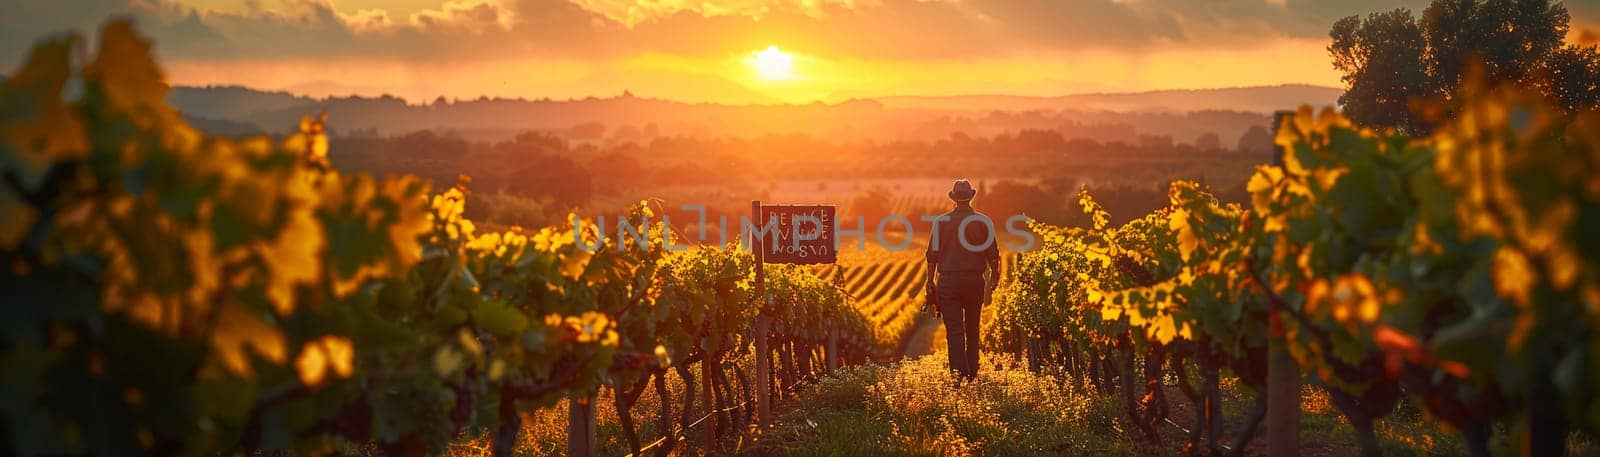 Winemaker Inspects Vineyard for Perfect Business Blend, Rows of vines under the sun compose a vista of dedication to the art of winemaking.